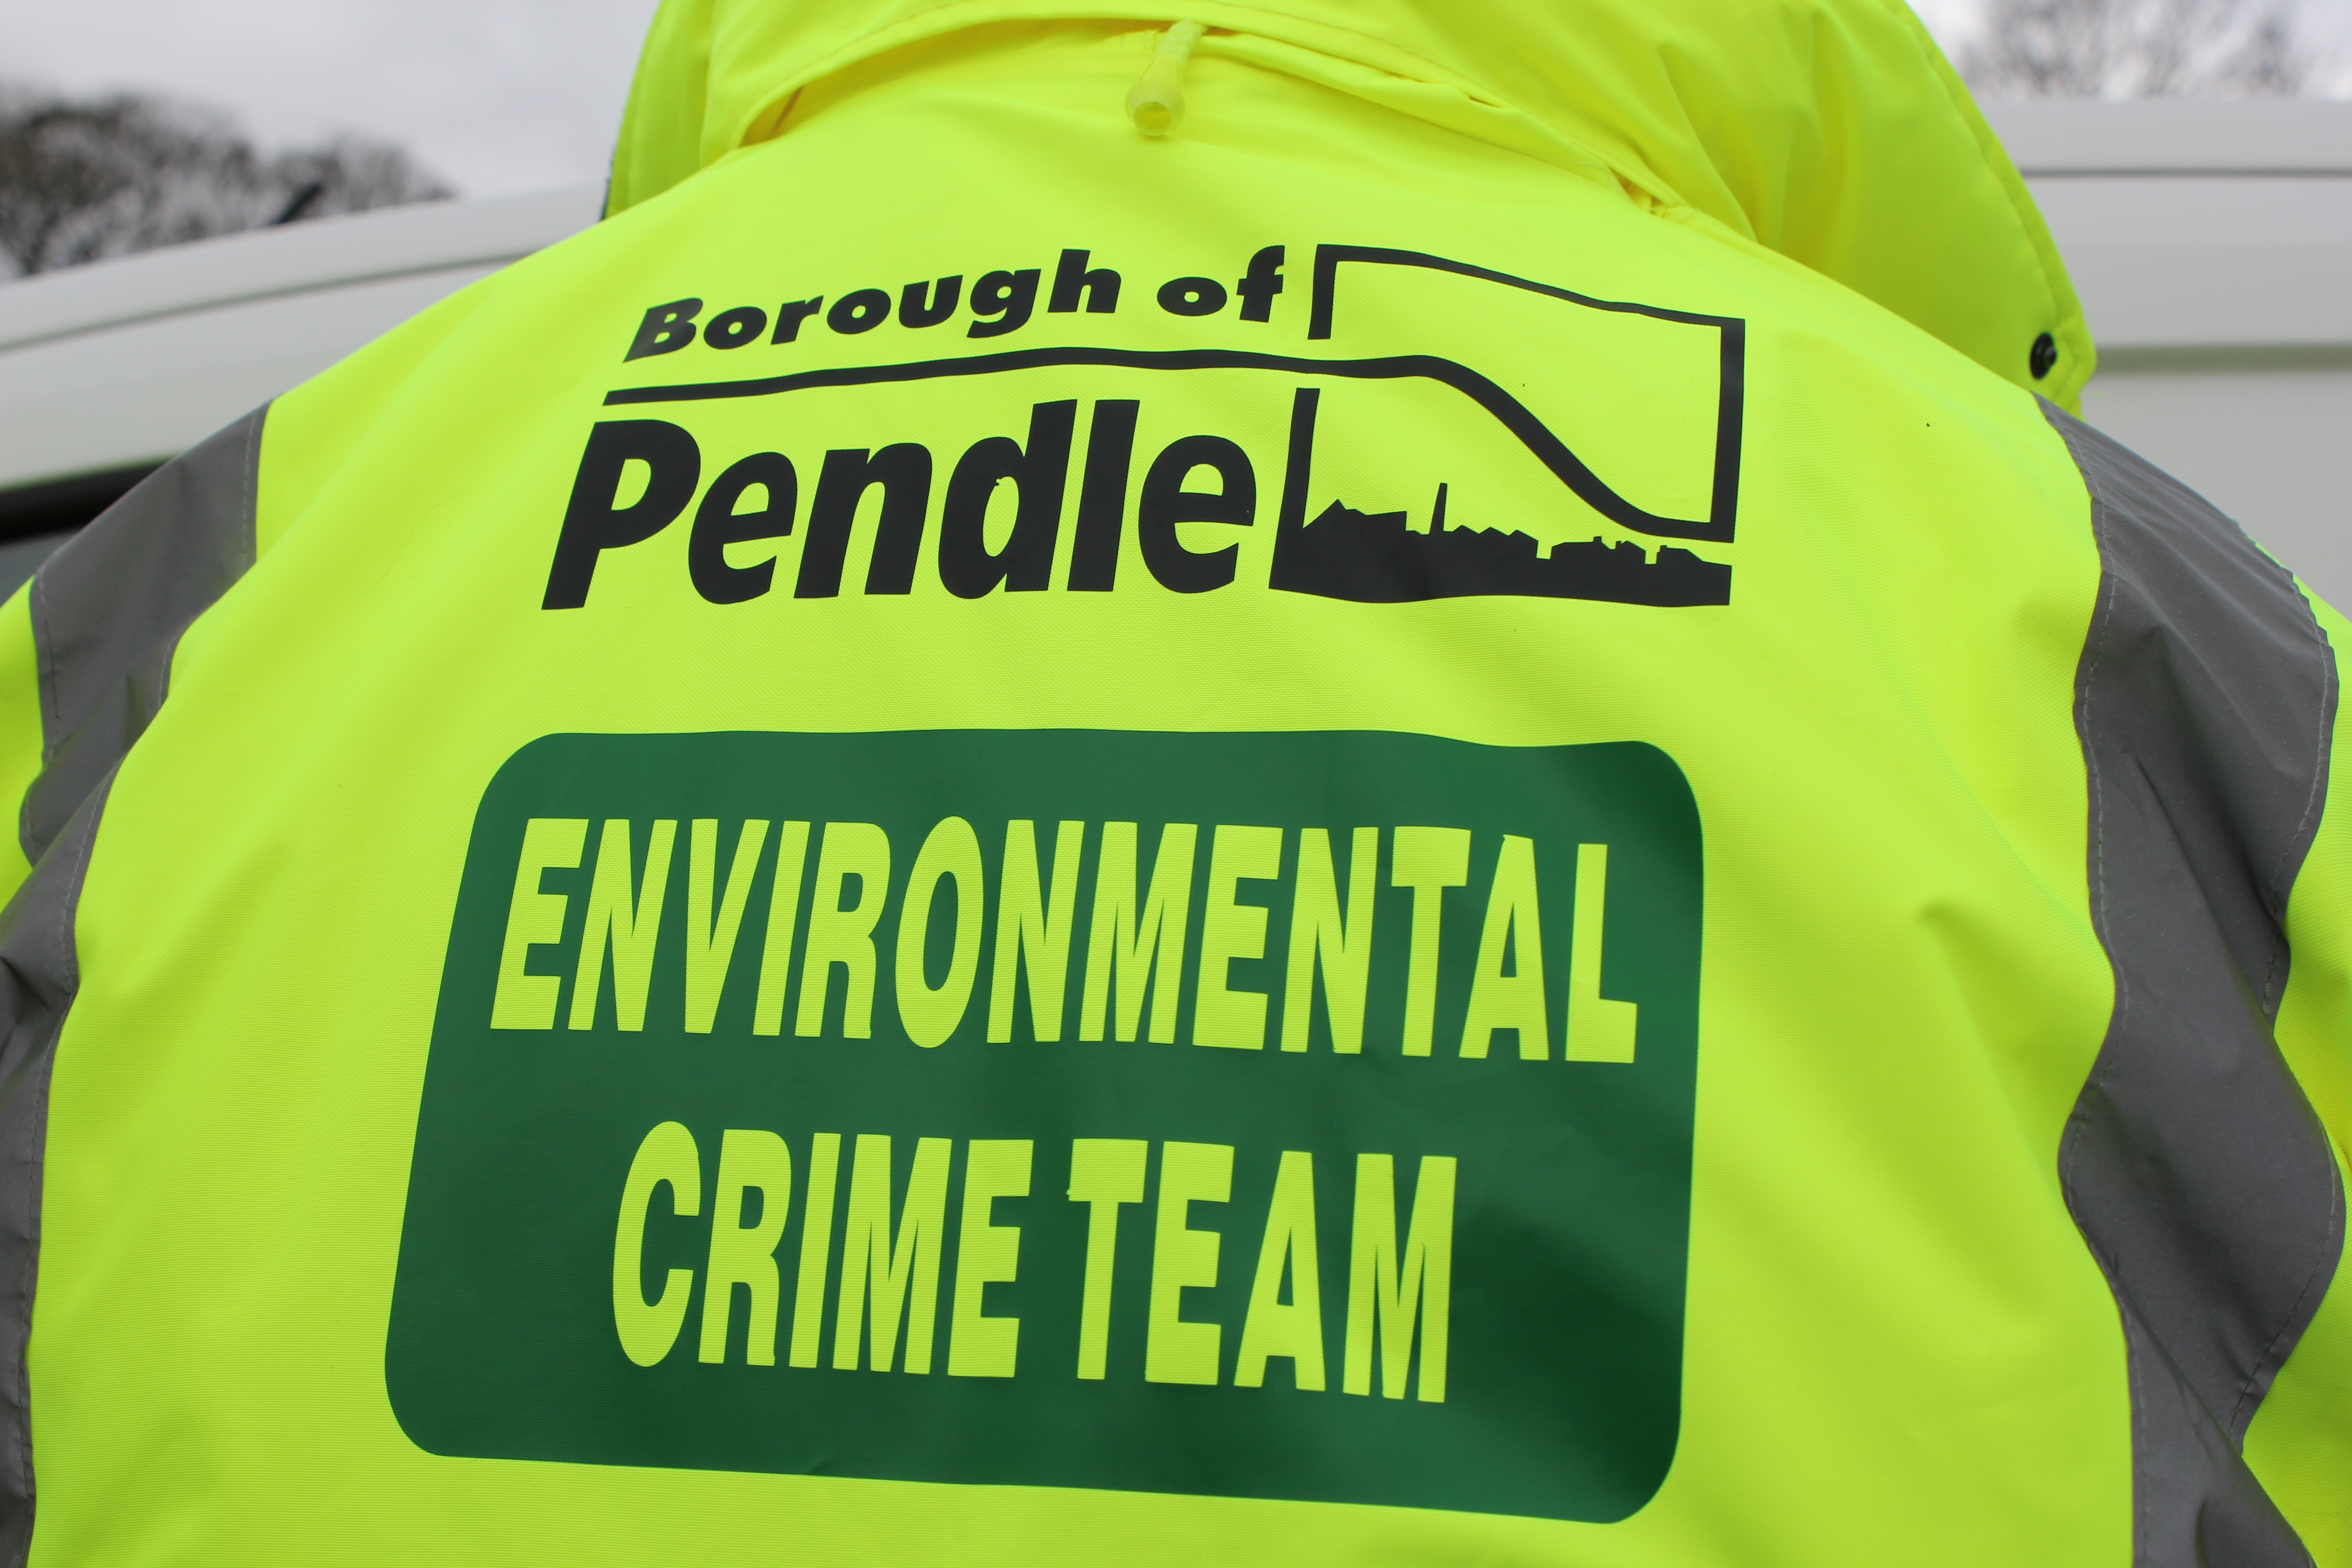 Photograph showing high vis jacket worn by Environmental Crime Team staff.